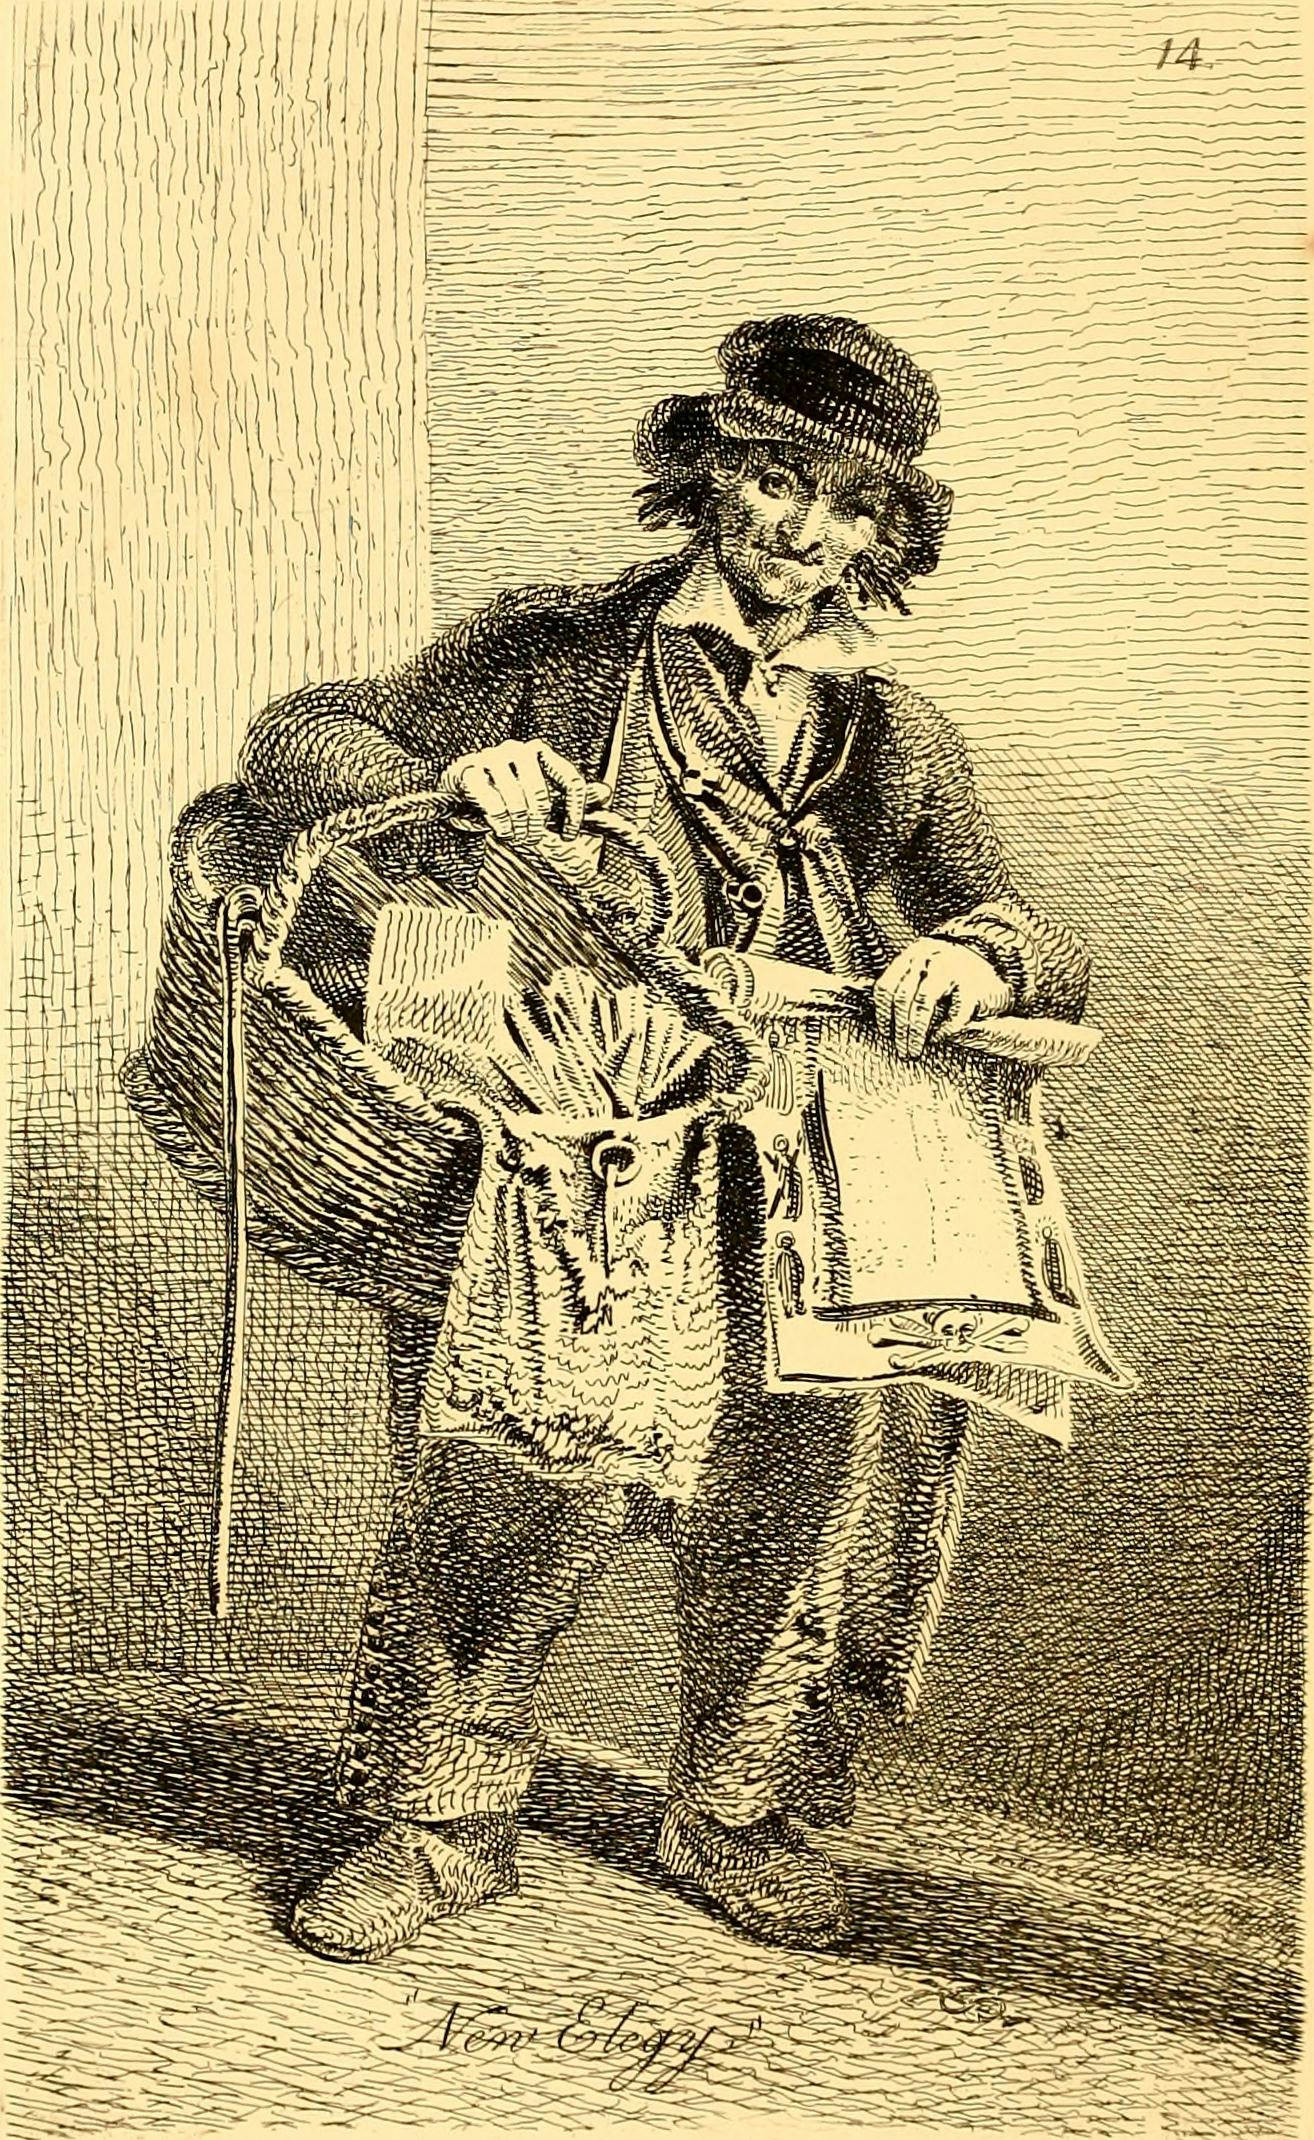 Black and white illustration of a man wearing a hat and jacket and holding a large basket of miscellaneous goods.